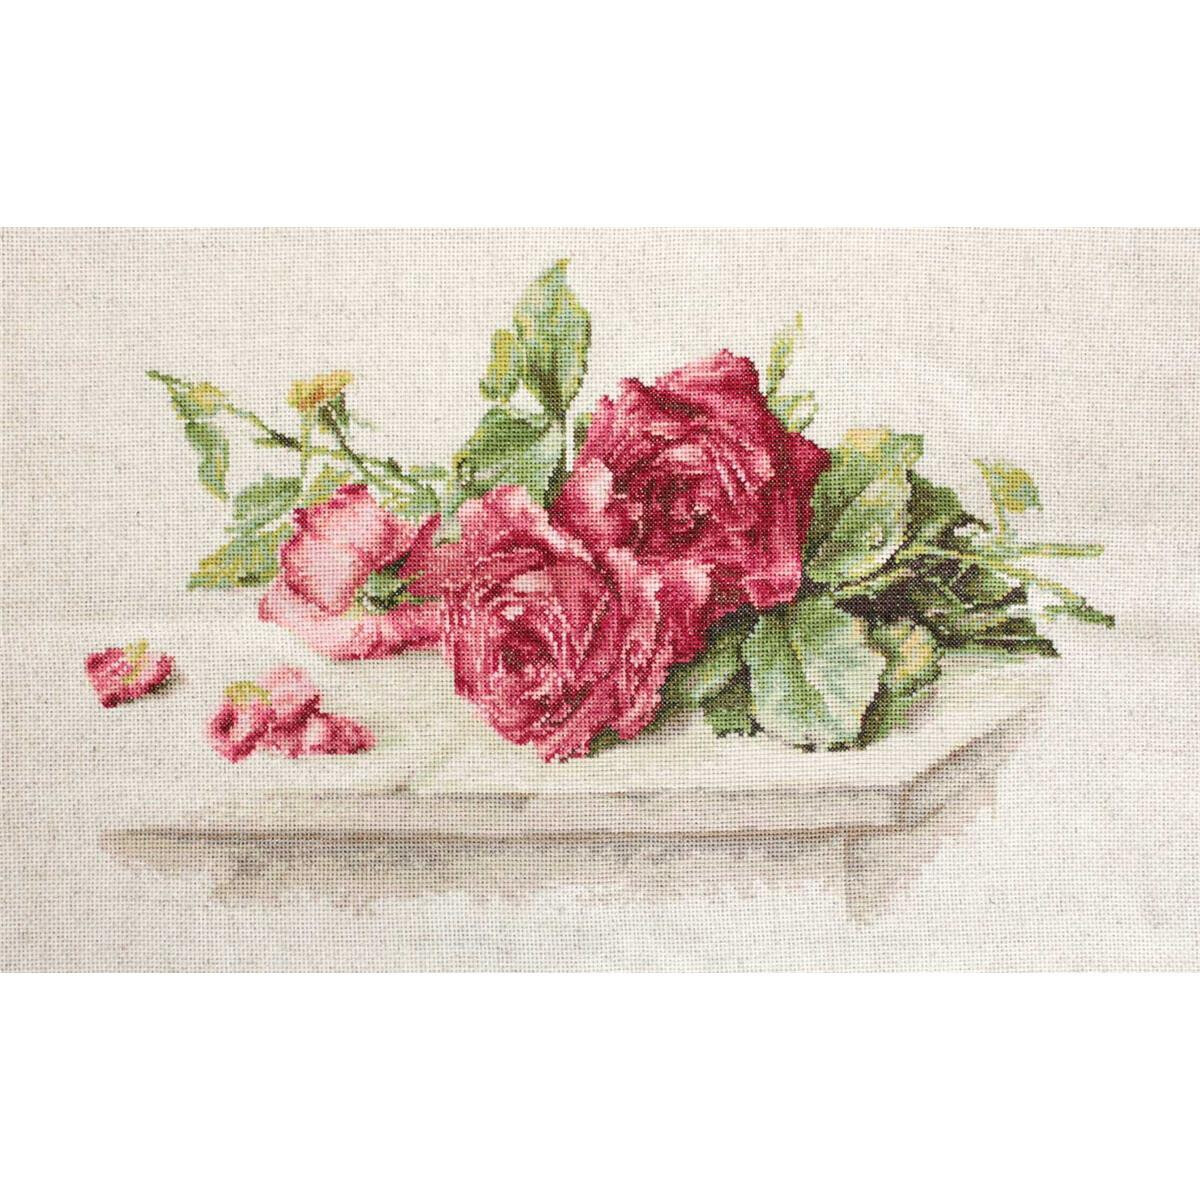 Luca-S counted Cross Stitch kit "Red Roses",...